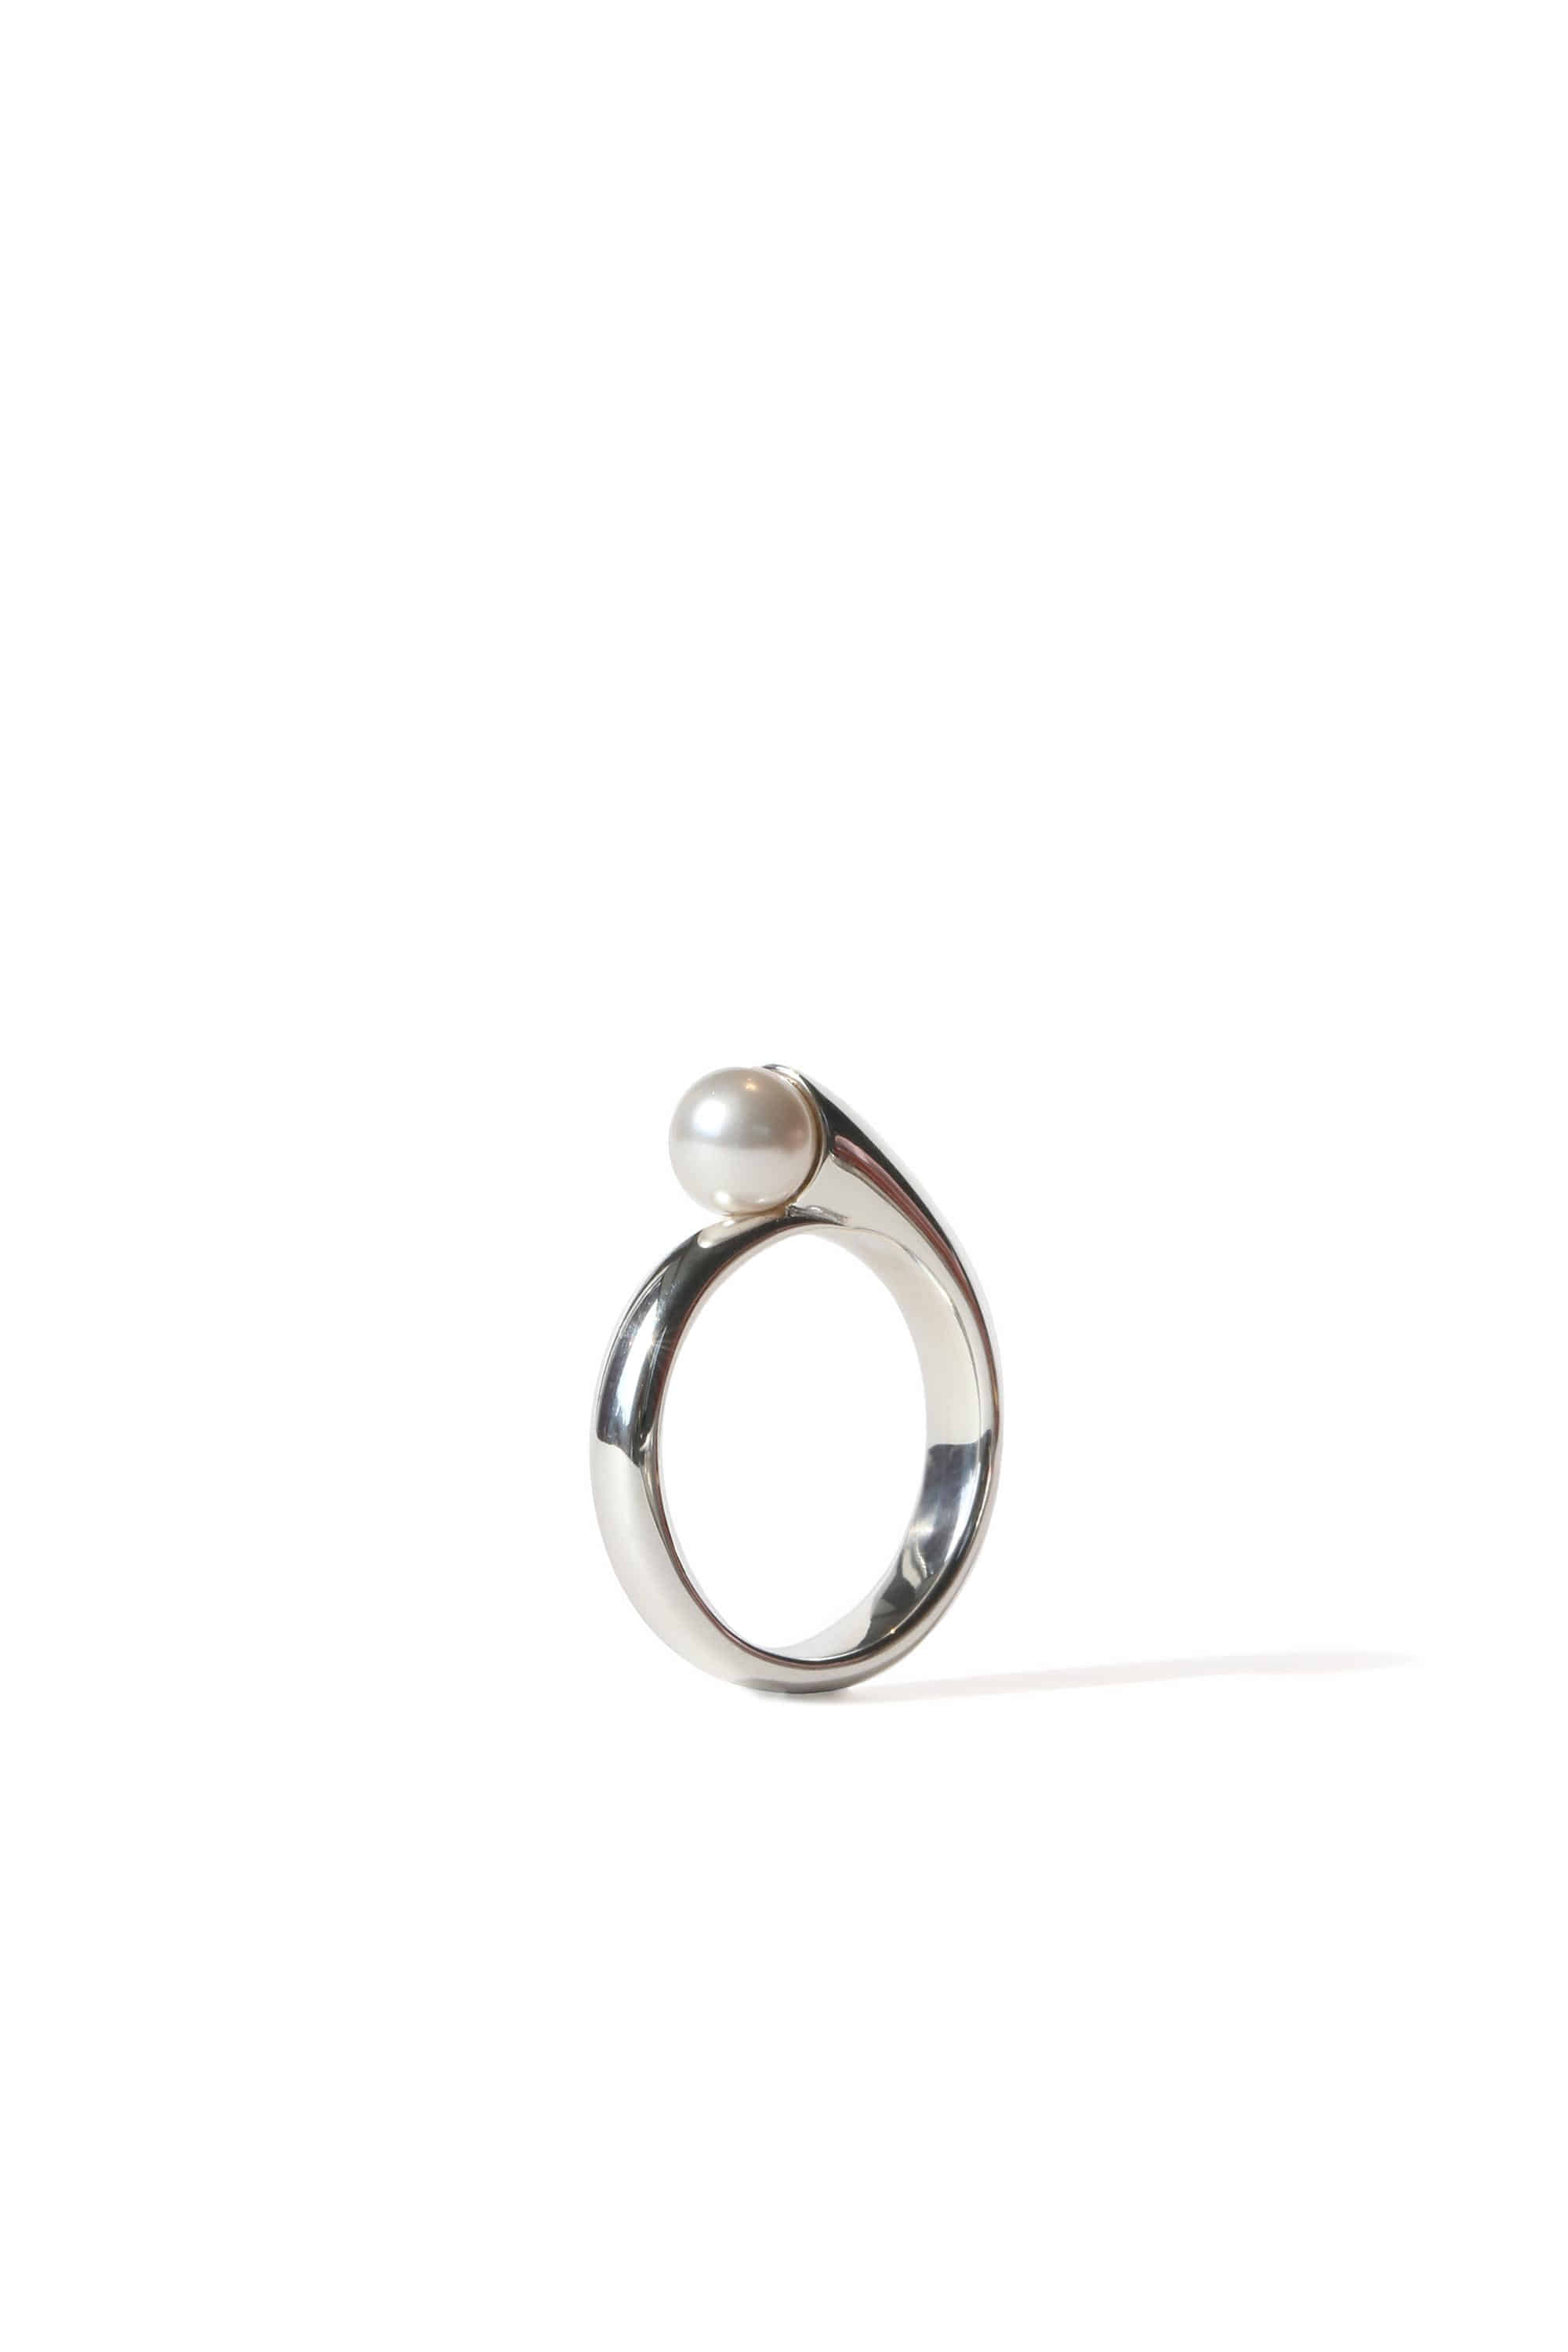 ARCH PEARL RING